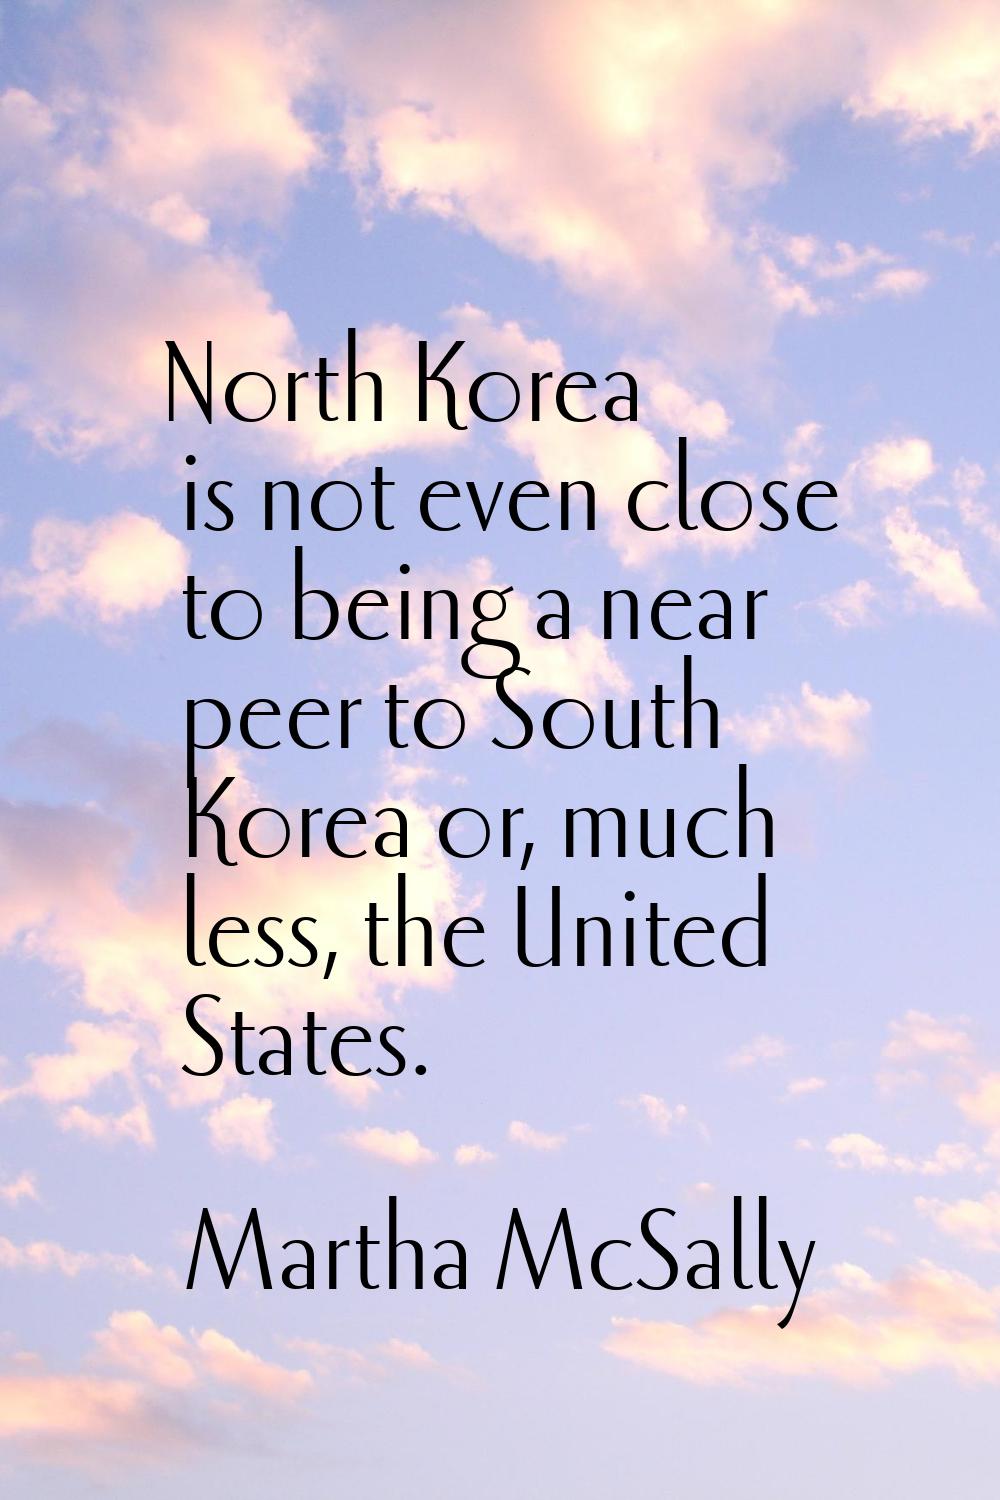 North Korea is not even close to being a near peer to South Korea or, much less, the United States.